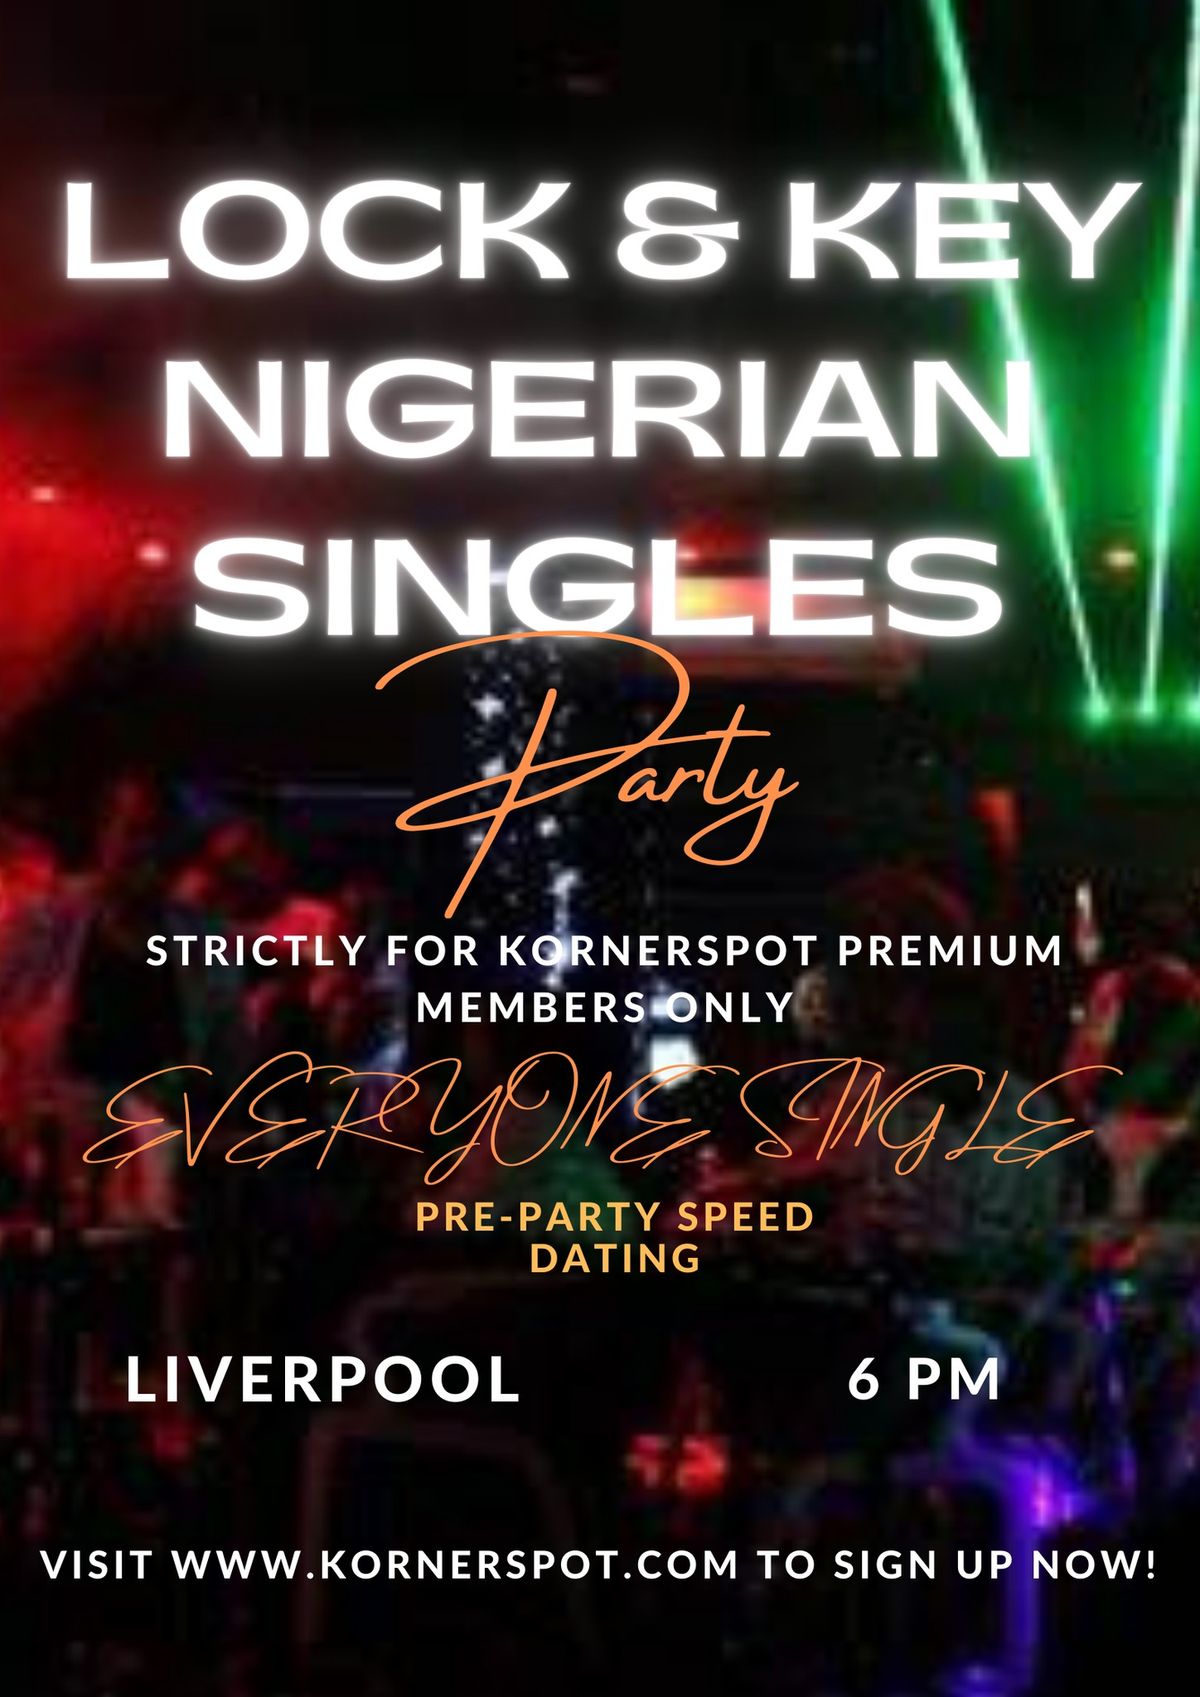 SINGLES PARTY